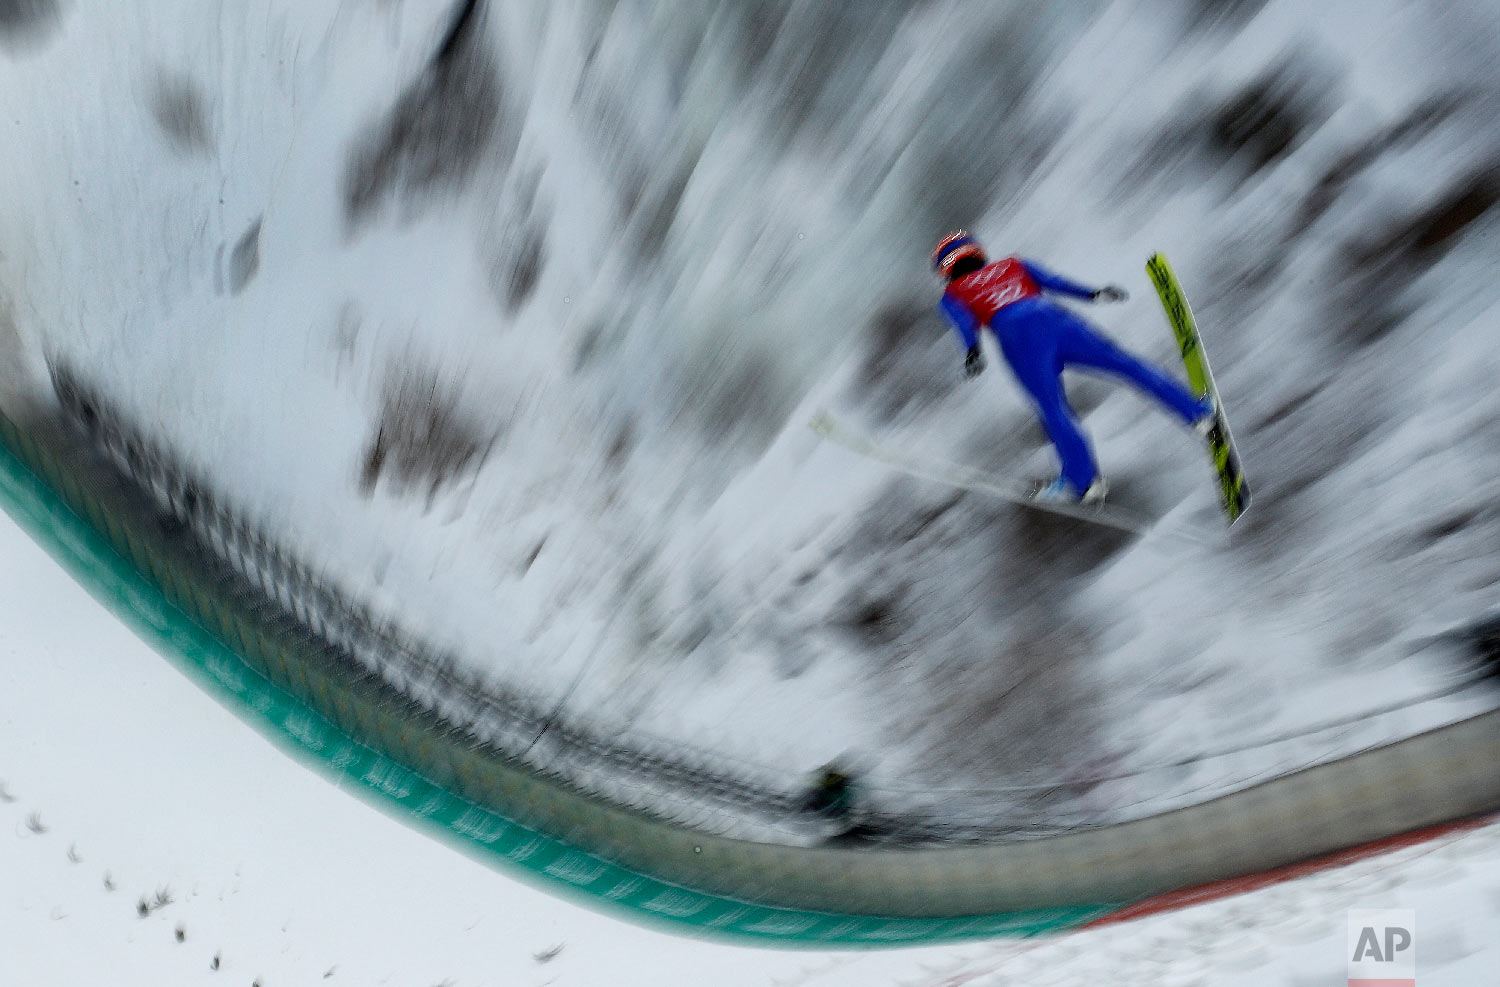  Yuki Ito, of Japan, practices for the women's ski jump competition in the 2018 Winter Olympics at the Alpensia Ski Jumping Center in Pyeongchang, South Korea, Saturday, Feb. 10, 2018. (AP Photo/Charlie Riedel) 